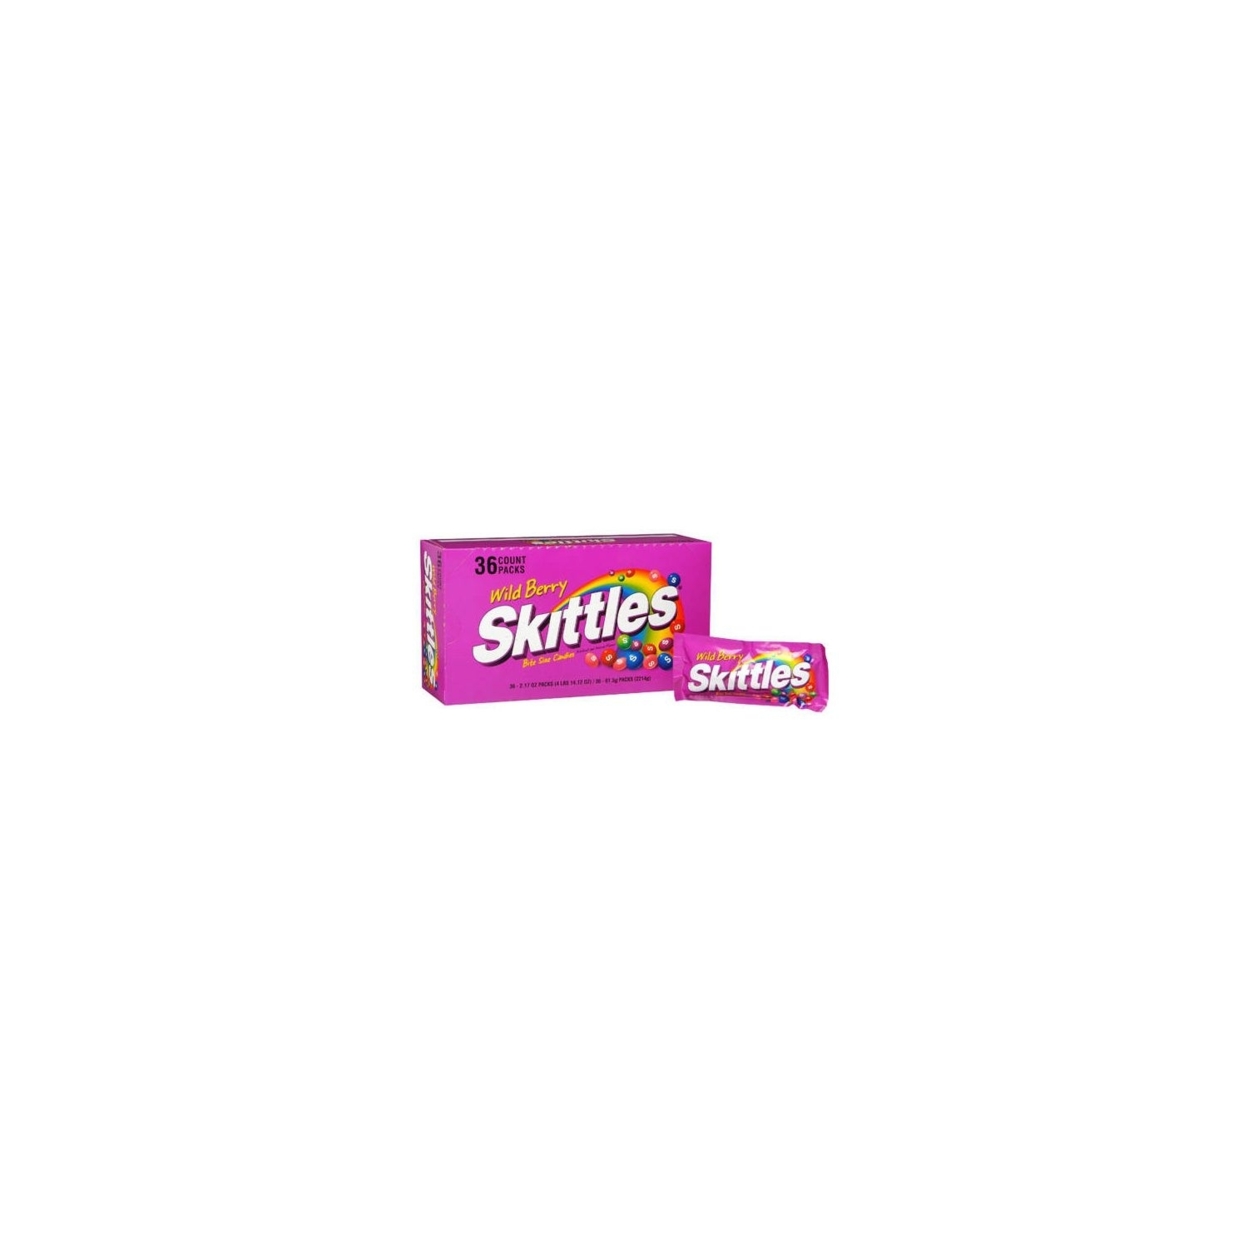 Wild Berry Skittles Candy - 36 / 2.17 Ounce Bags